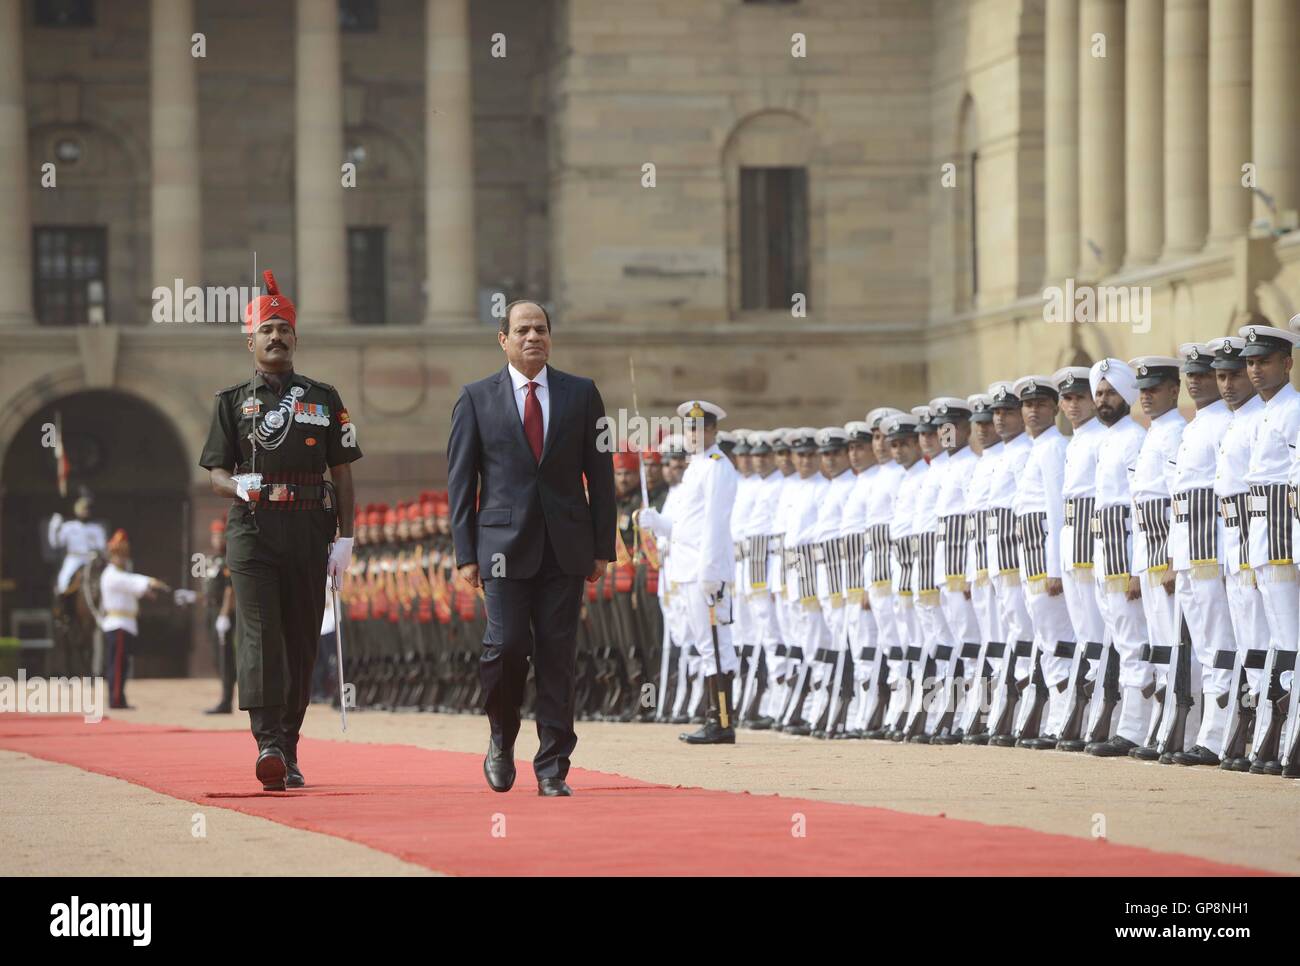 New Delhi, India. 2nd Sep, 2016. Egyptian President Abdel Fattah al-Sisi (2nd L) inspects Indian guards of honor during the welcome ceremony at the Indian Presidential Palace in New Delhi, capital of India, Sept. 2, 2016. India and Egypt agreed on Friday to bolster their defense and security ties to deal with the growing threats of terrorism and radicalization. Credit:  Partha Sarkar/Xinhua/Alamy Live News Stock Photo